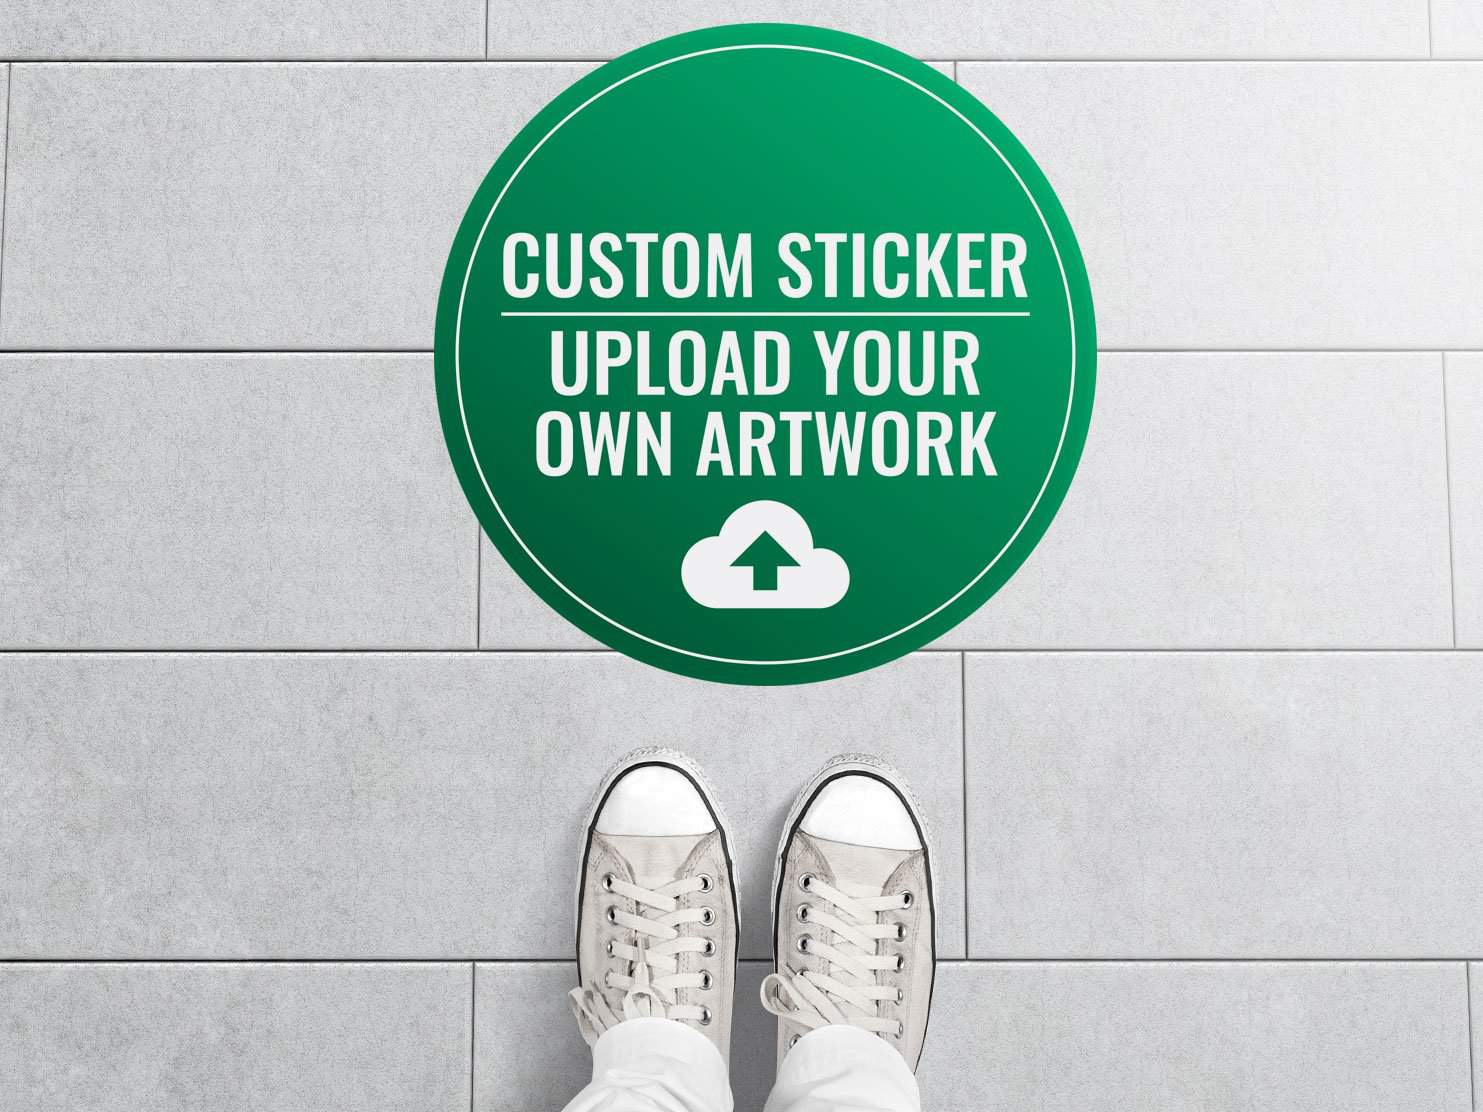 a round green and white social distancing sticker on a smooth tiled floor that says "custom artwork - upload your own artwork"